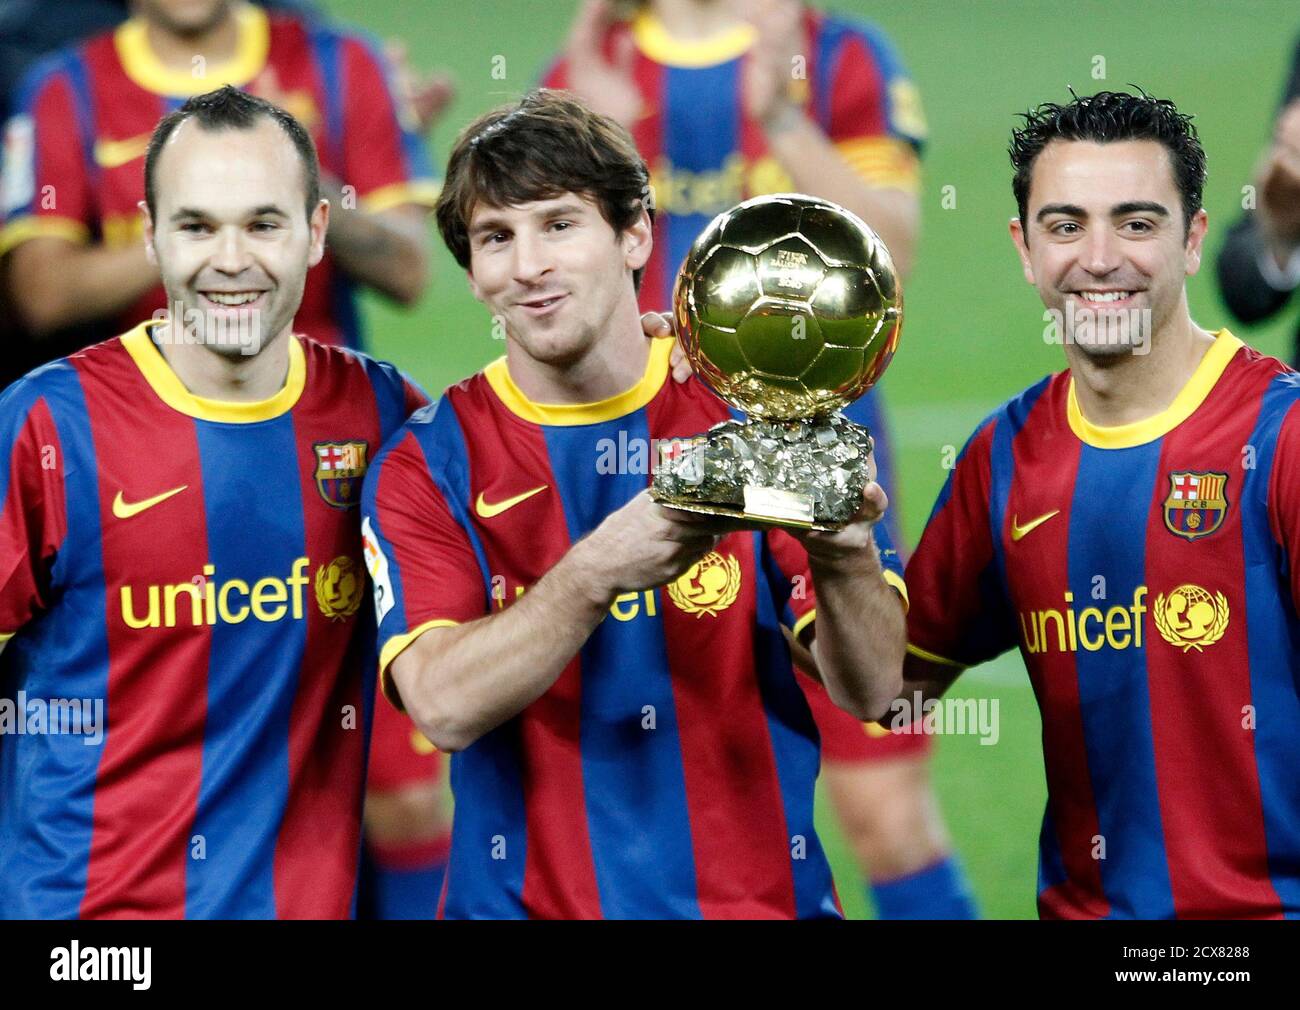 Barcelona's Lionel Messi poses with his Ballon d'Or trophy, the World  Player of the Year award, next to his teammates Andres Iniesta (L) and Xavi  Hernandez before their Spanish King's Cup soccer